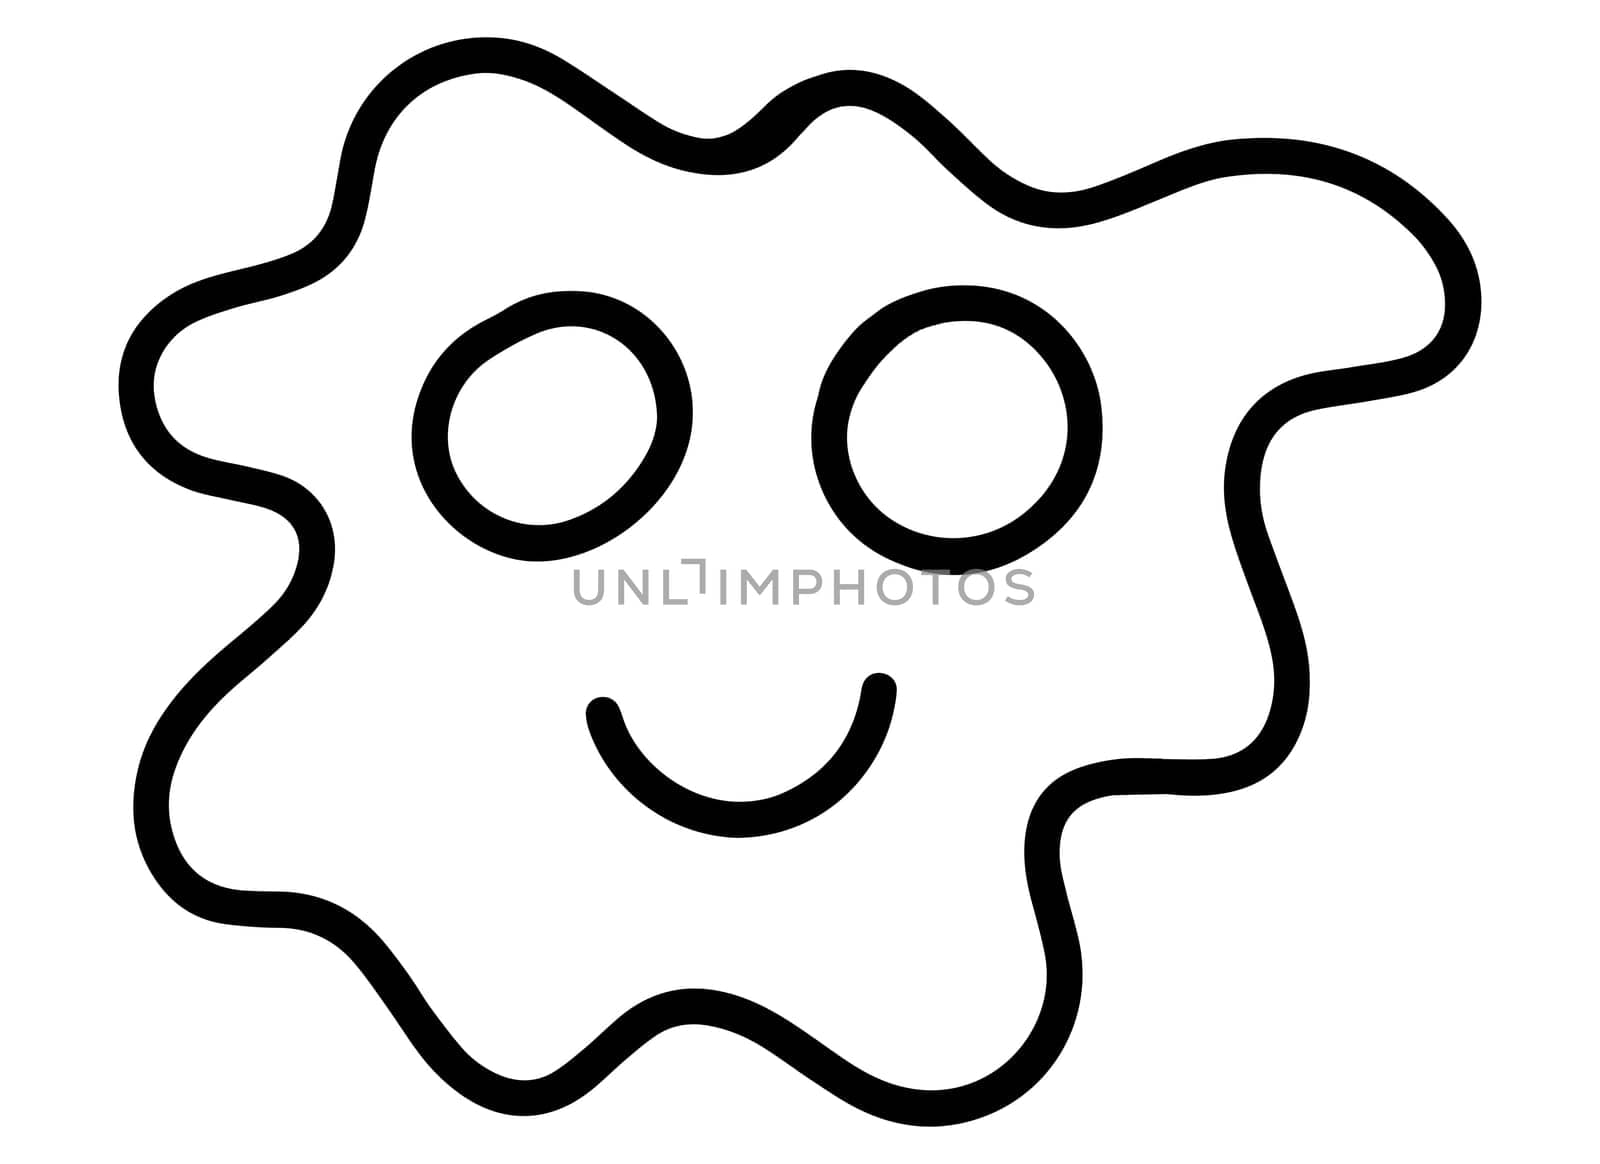 Printable Coloring Page for Kids. Black and White Smiley Face Isolated Illustration. Coloring Book with Smile Icon.